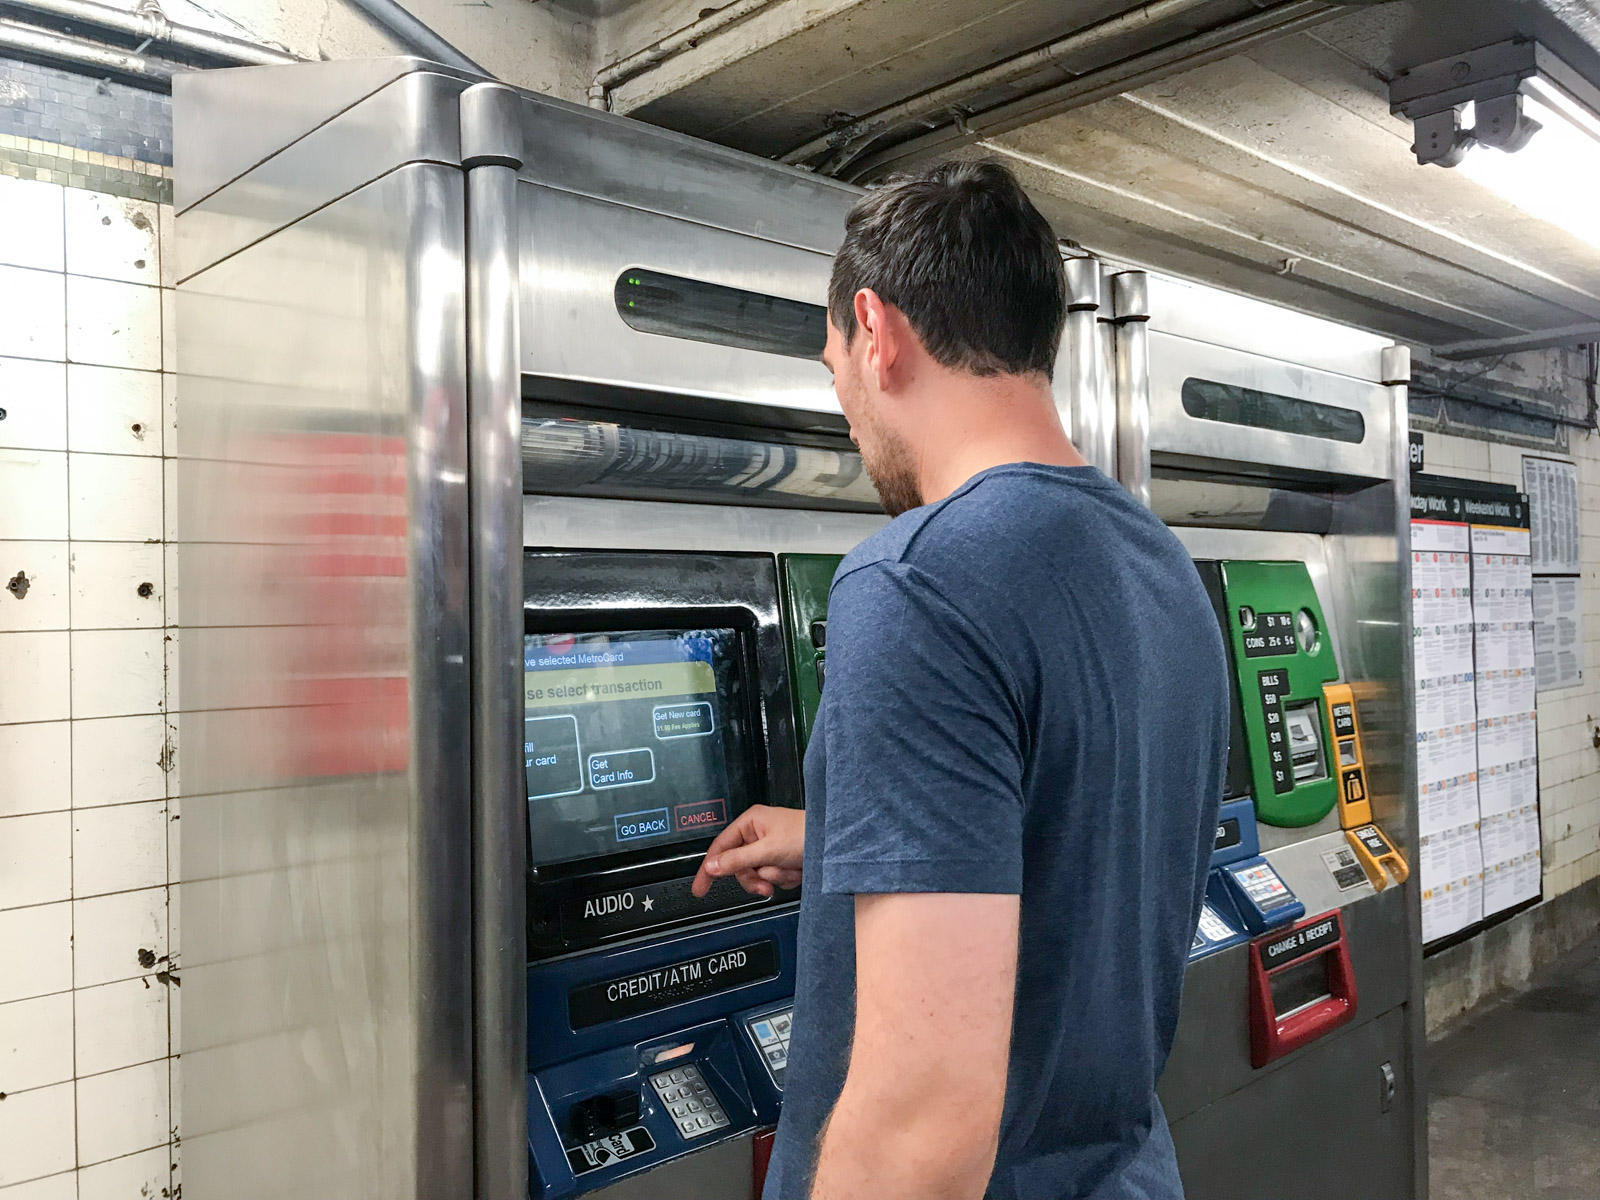 A man using a ticket machine to purchase subway tickets